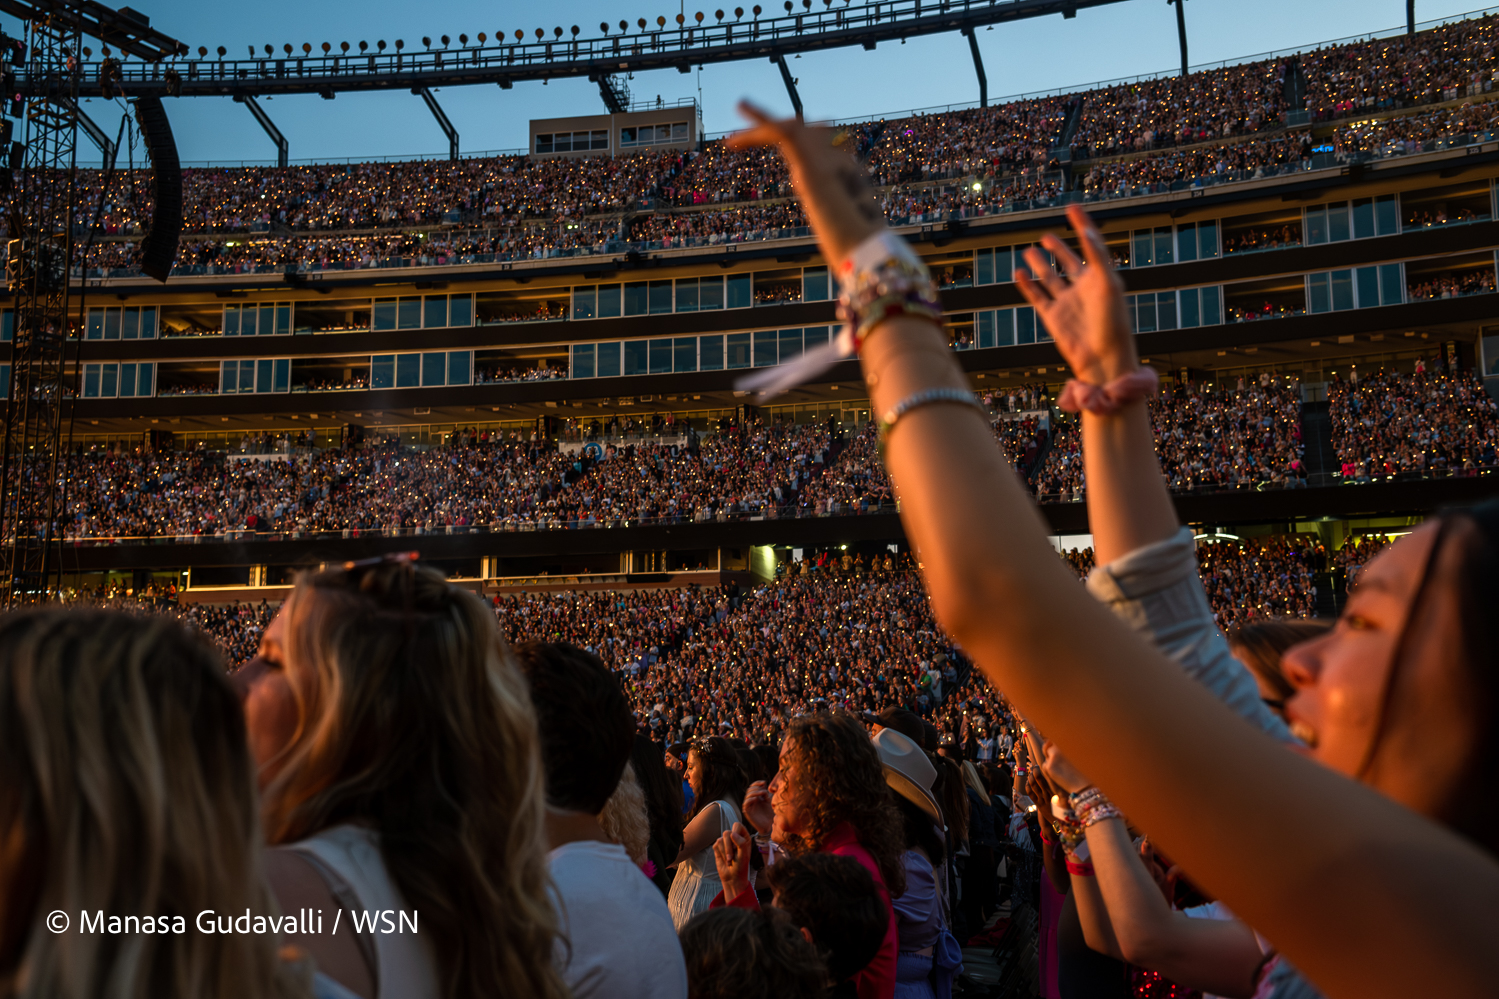 Fans fill the stands of Gillette Stadium as Taylor Swift performs, a yellow-white light shining on them from the stage. In the foreground, a fan wearing multiple bracelets raises their arms toward the stage.